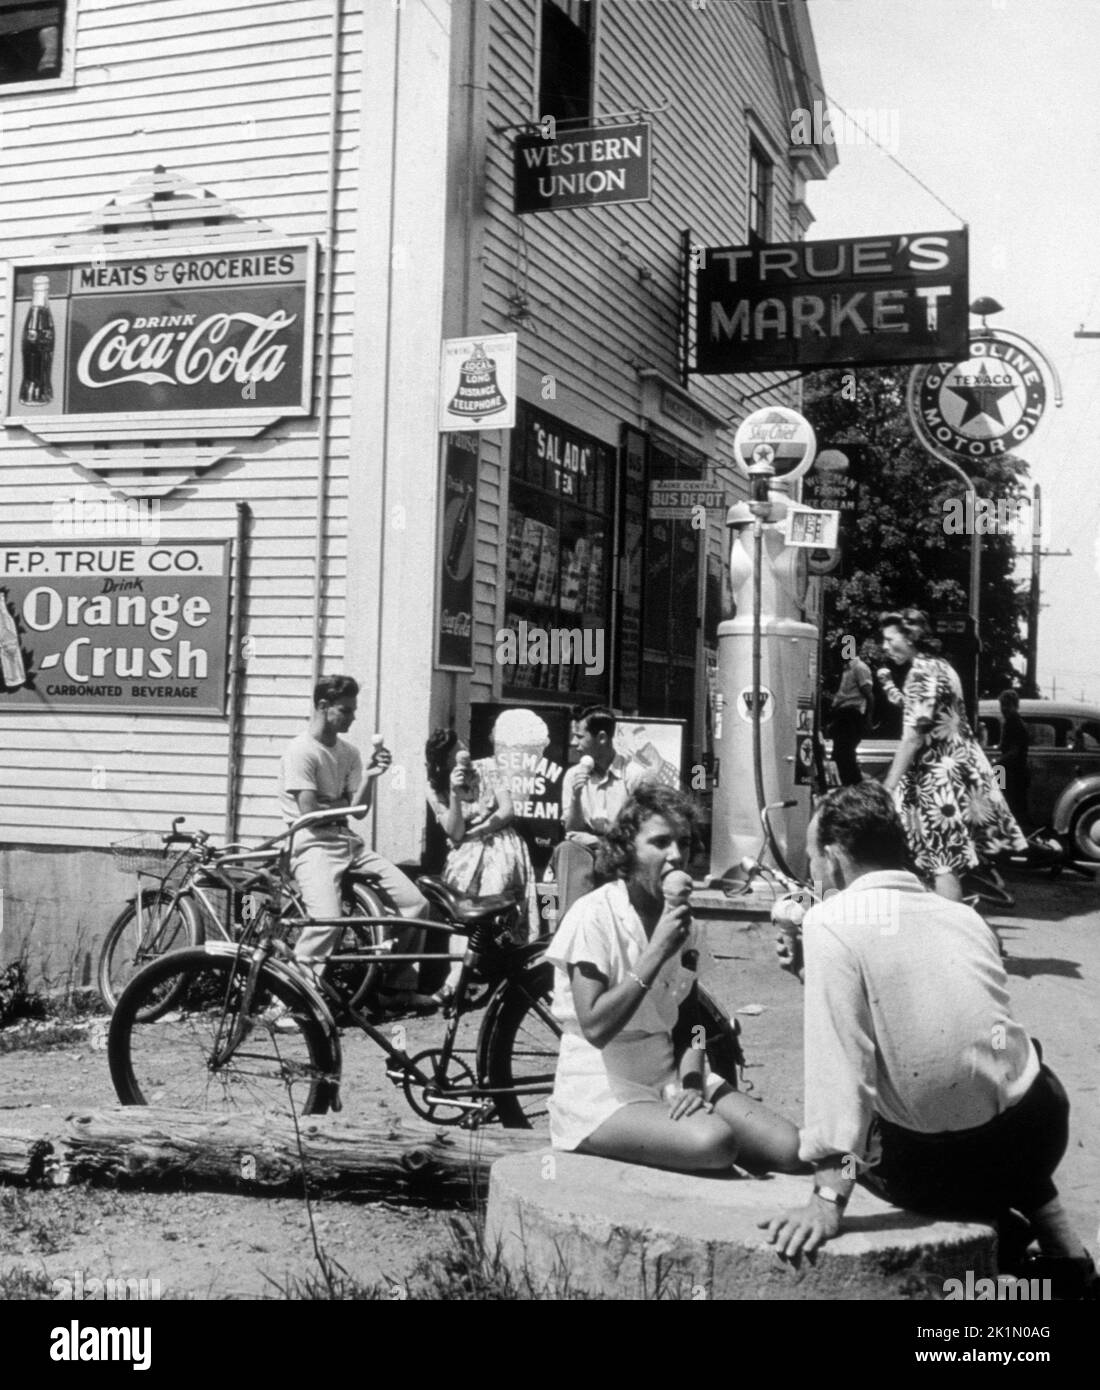 Bicycle riders enjoy an ice cream break. Photograph taken in the 1950's. Stock Photo